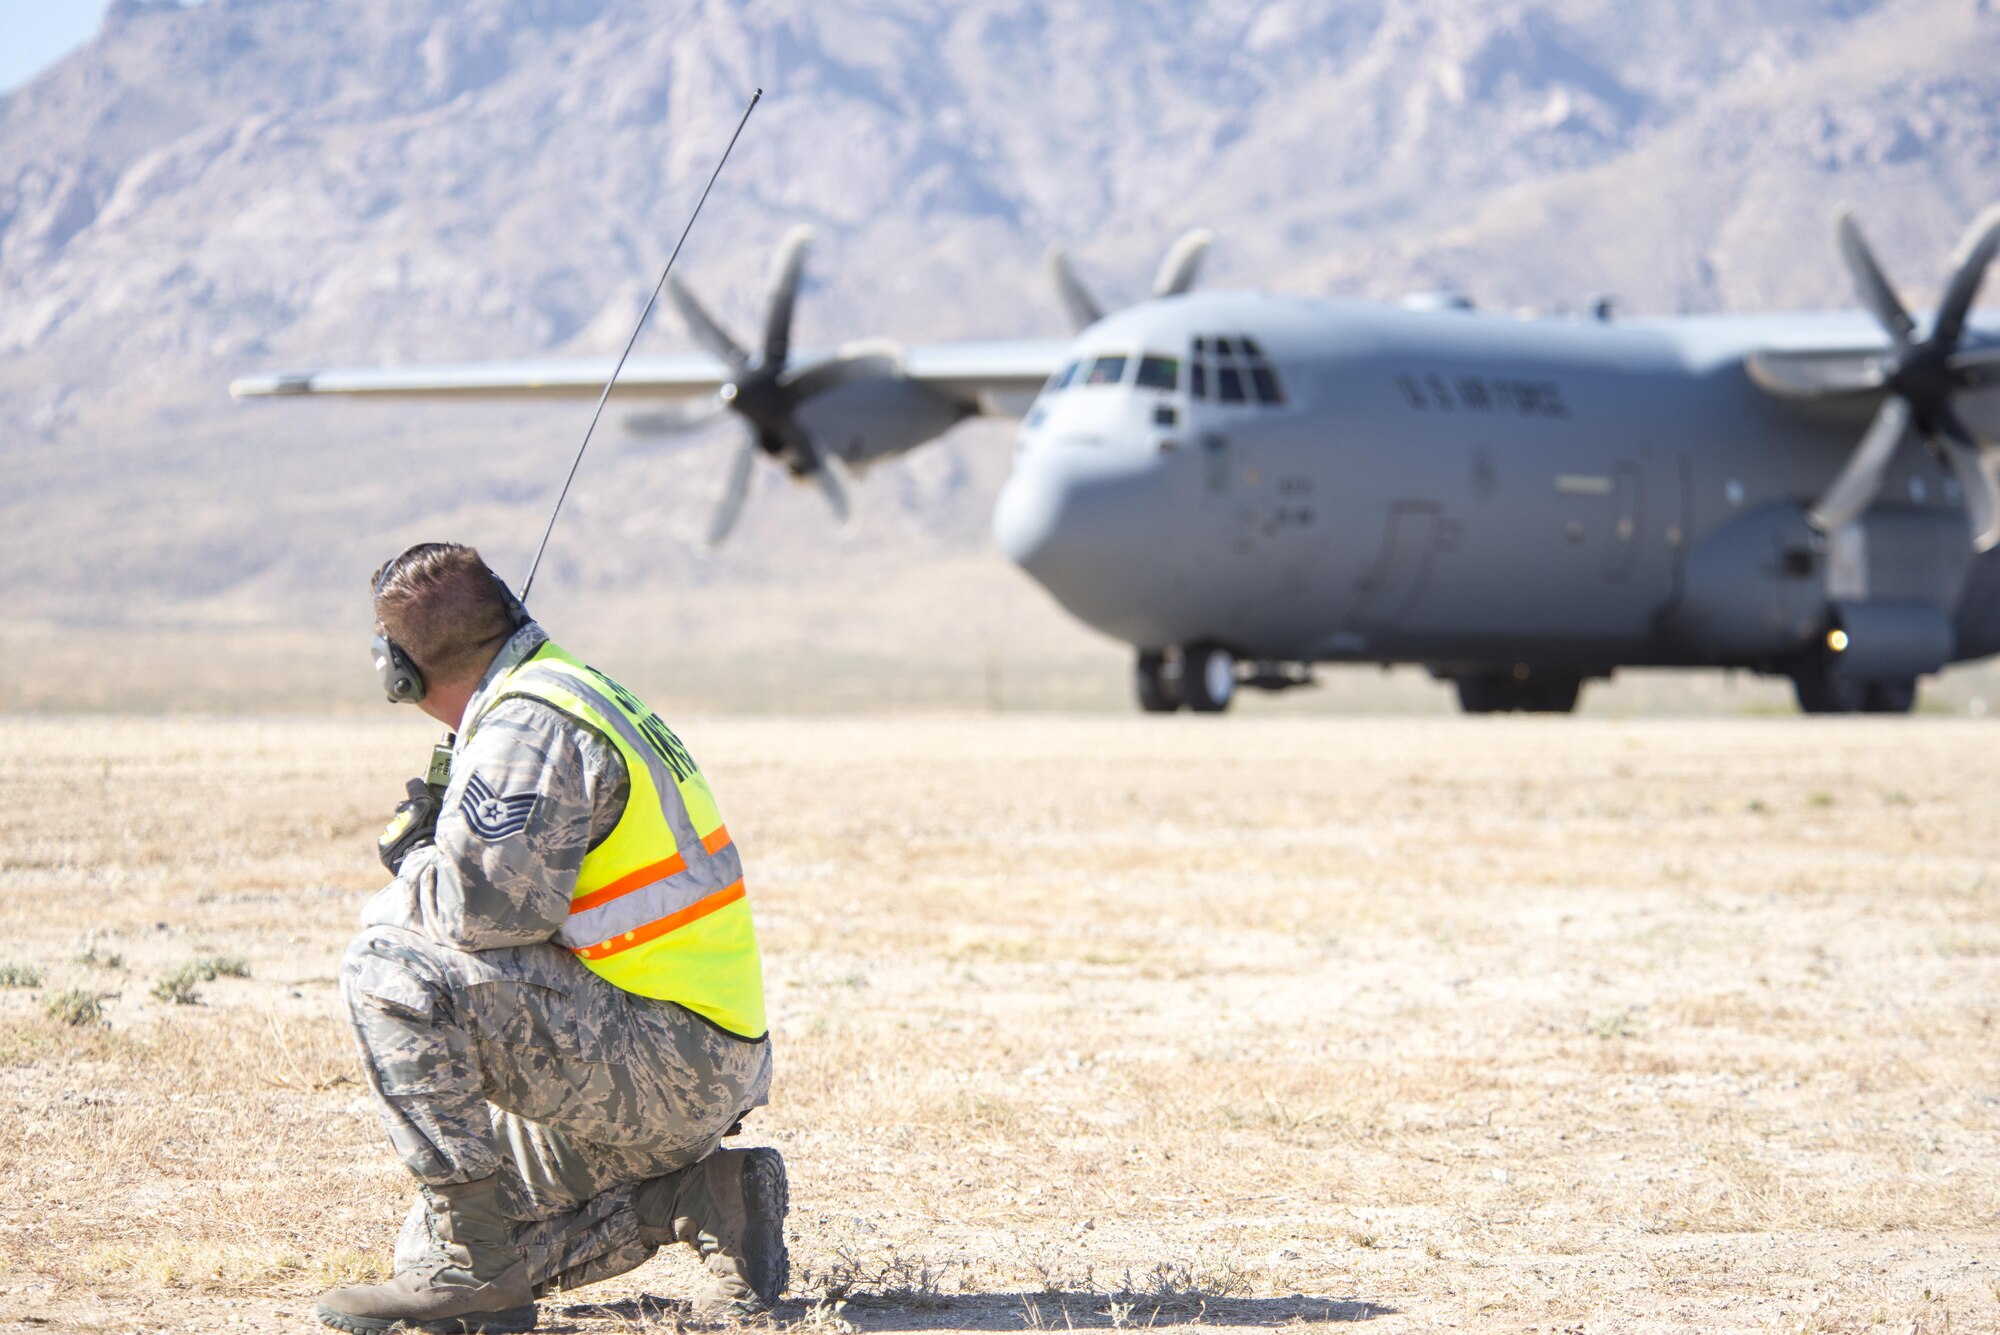 Tech. Sgt. Attila Csipes, 49th Logistics Readiness Squadron Small Air Terminal non commissioned officer in charge waits to launch out a C-130 Hercules from Little Rock Air Force Base, Ark., Oct. 31, 2017. Airmen from the 49th LRS offloaded equipment from the aircraft for Vigilant Shield 18 at White Sands Missile Range, N.M.  The equipment will be used by the 10th Mountain Division for their part of the exercise from Nov 1-9, 2017.  (U.S. Air Force photo by Tech. Sgt. Jeff Howerton)